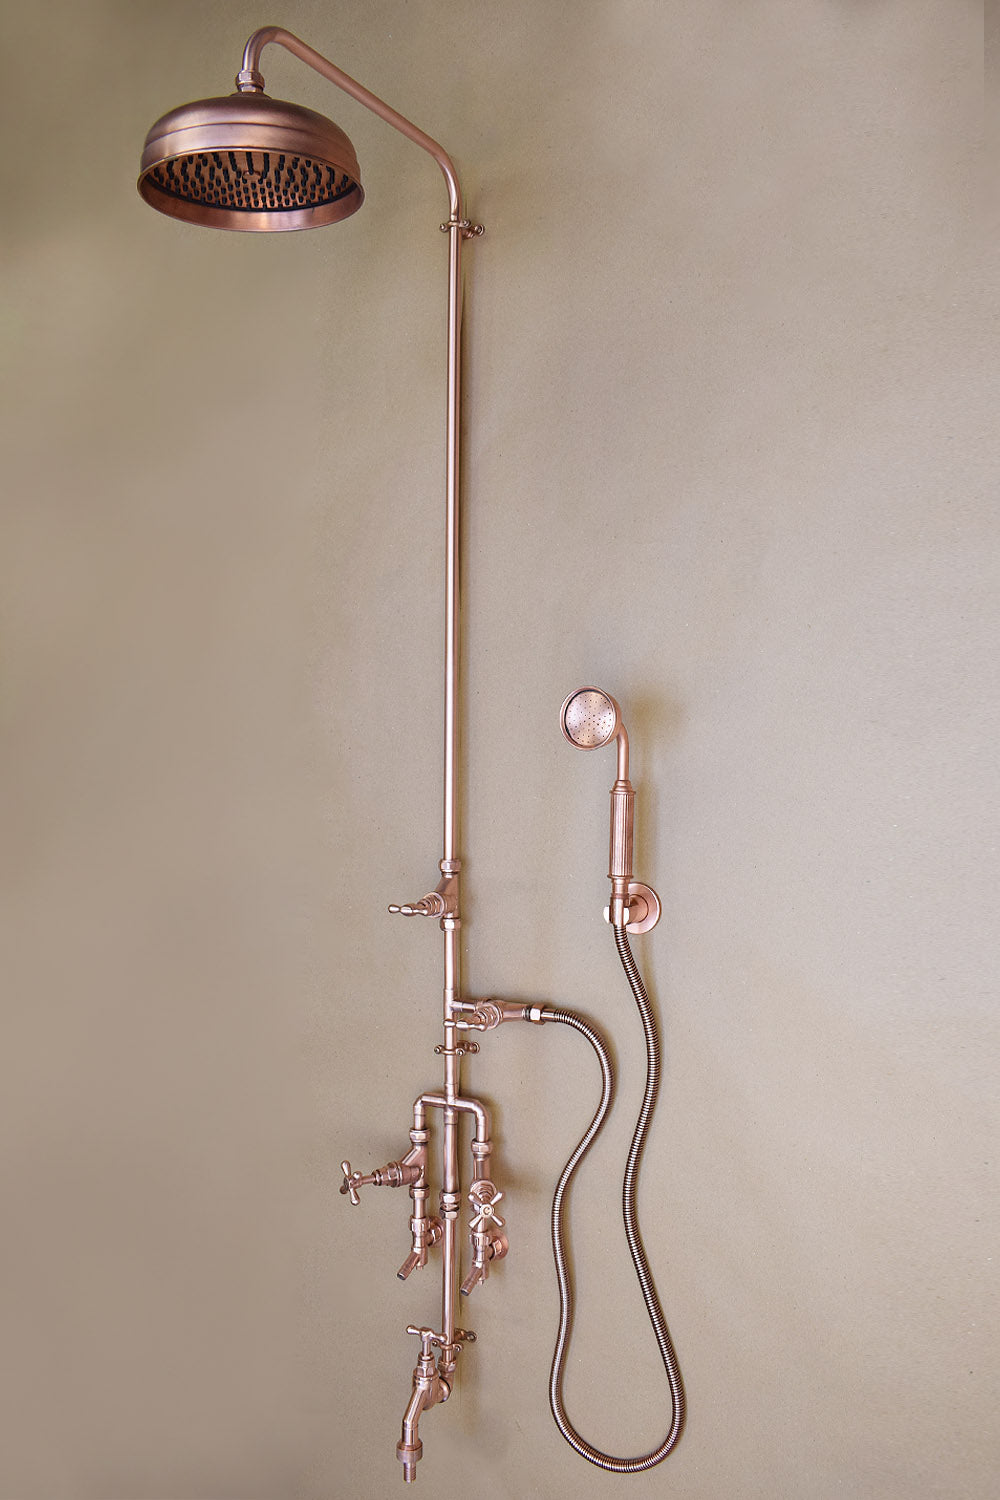 new fully copper outdoor shower design with a mix of industrial and natural elements